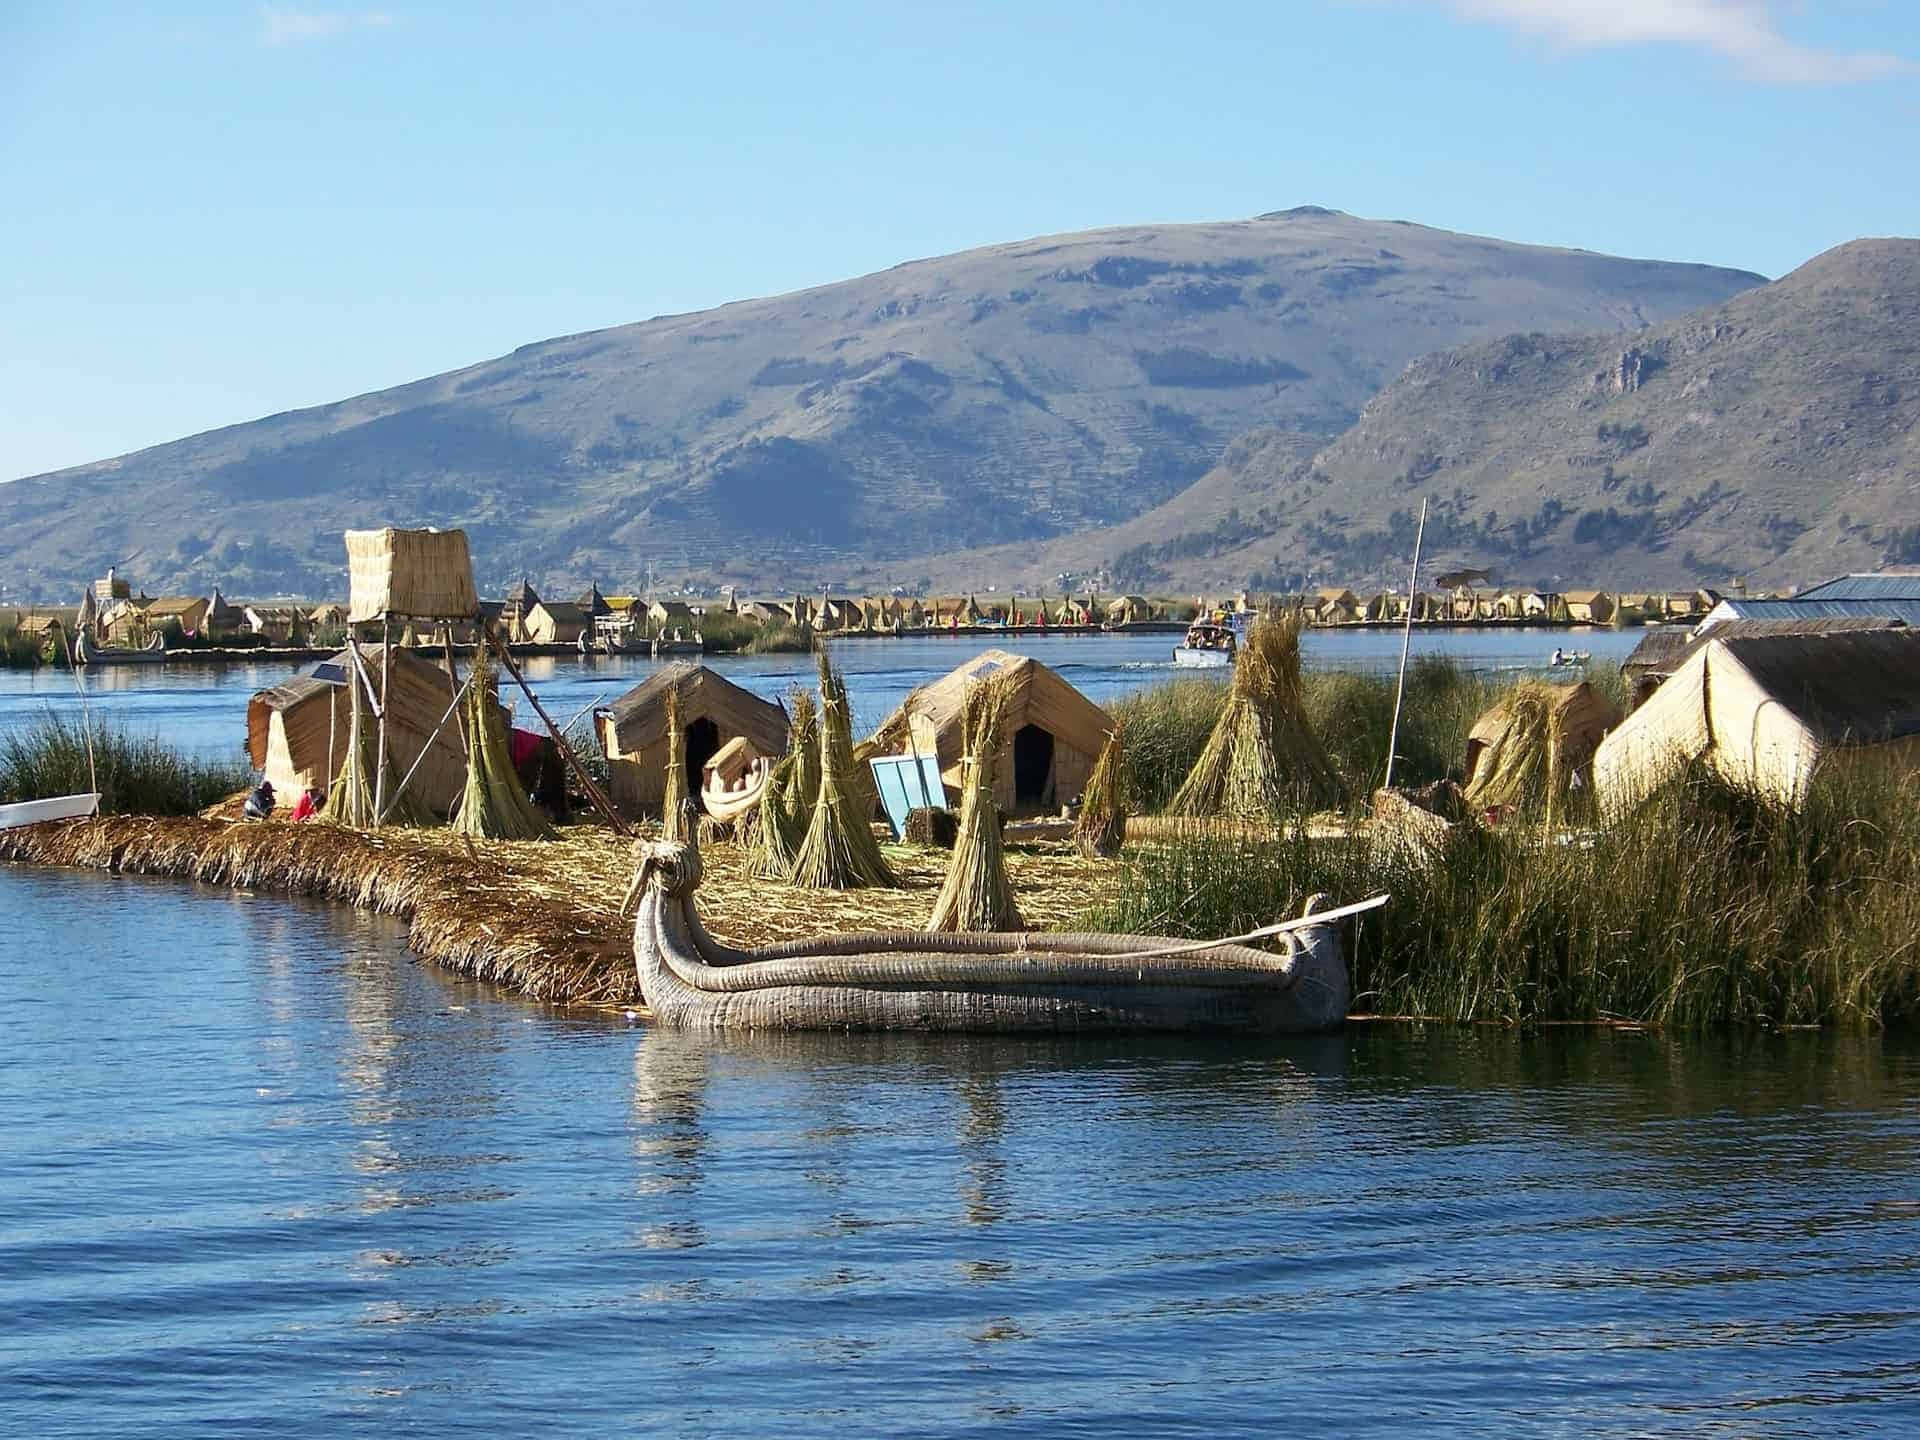 "Spectacular view of man-made islands in Lake Titicaca" Wallpaper